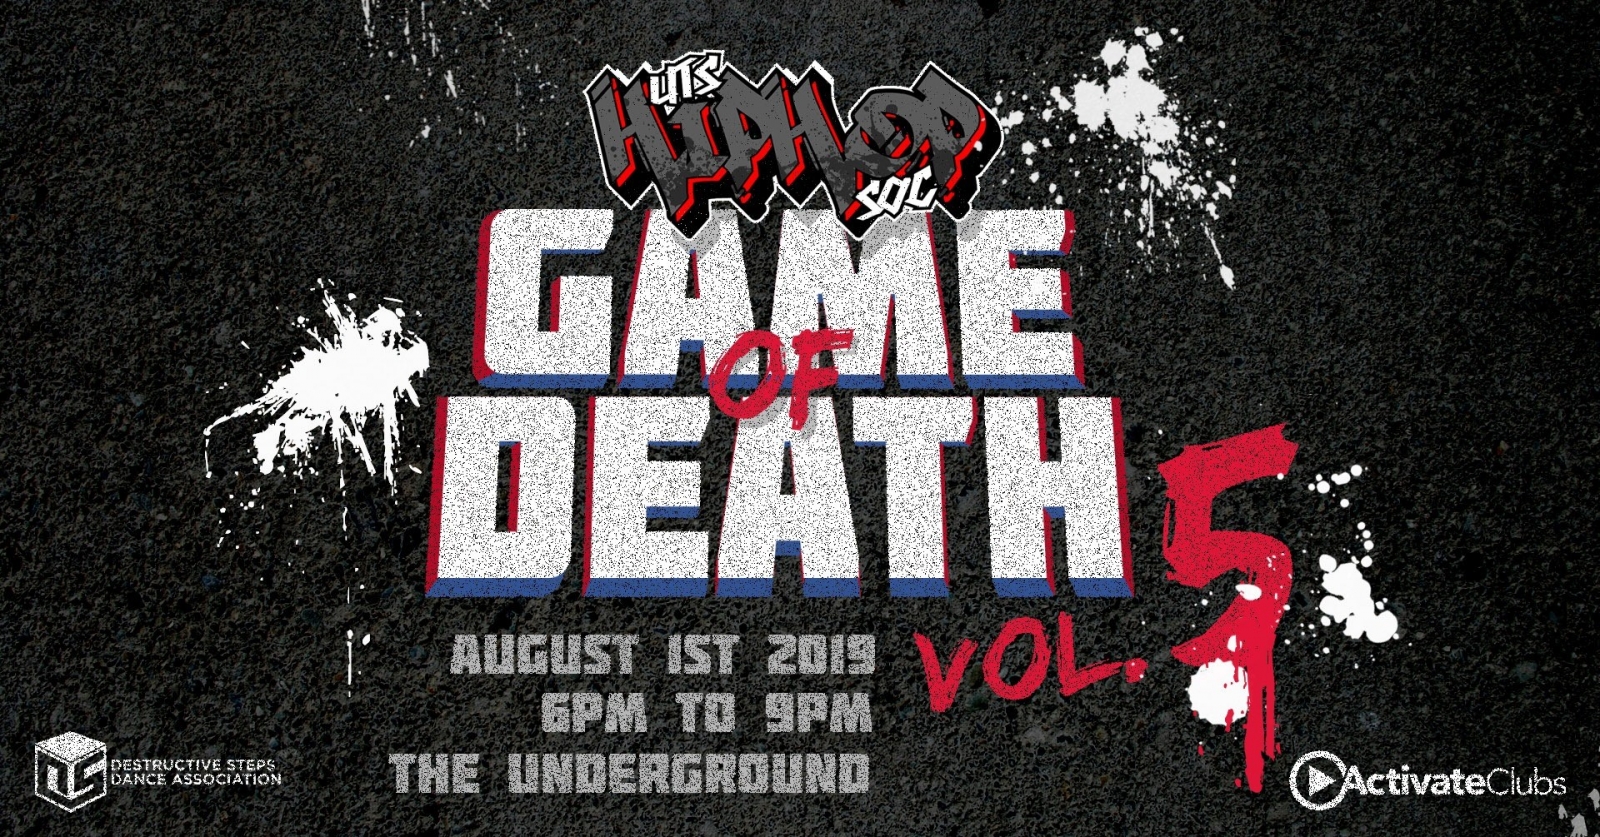 UTS Hiphop Society Presents: GAME of DEATH  2019 poster